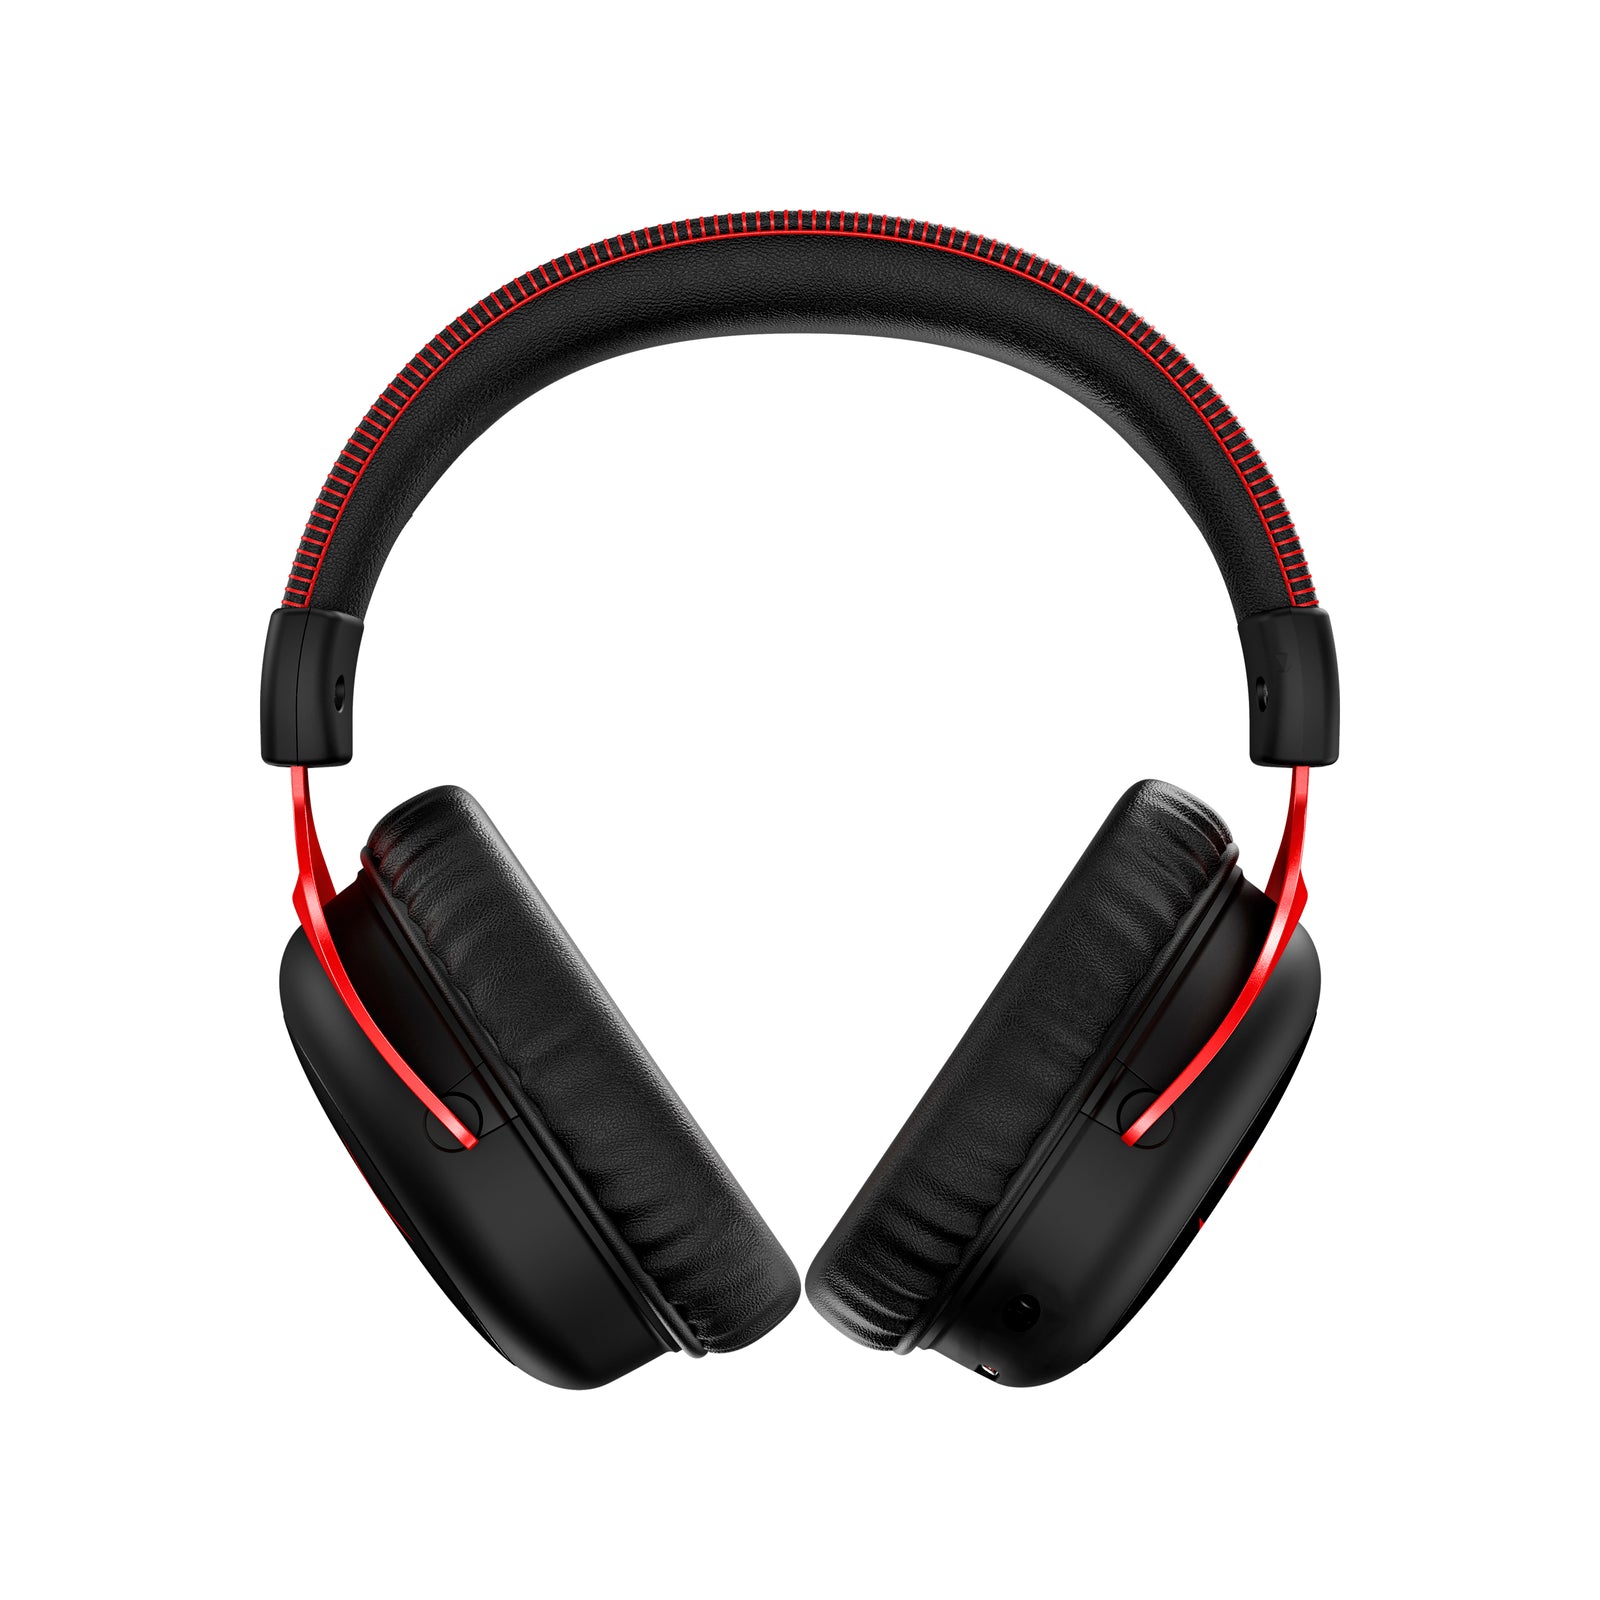 Front side view of HyperX Cloud II wireless gaming headset